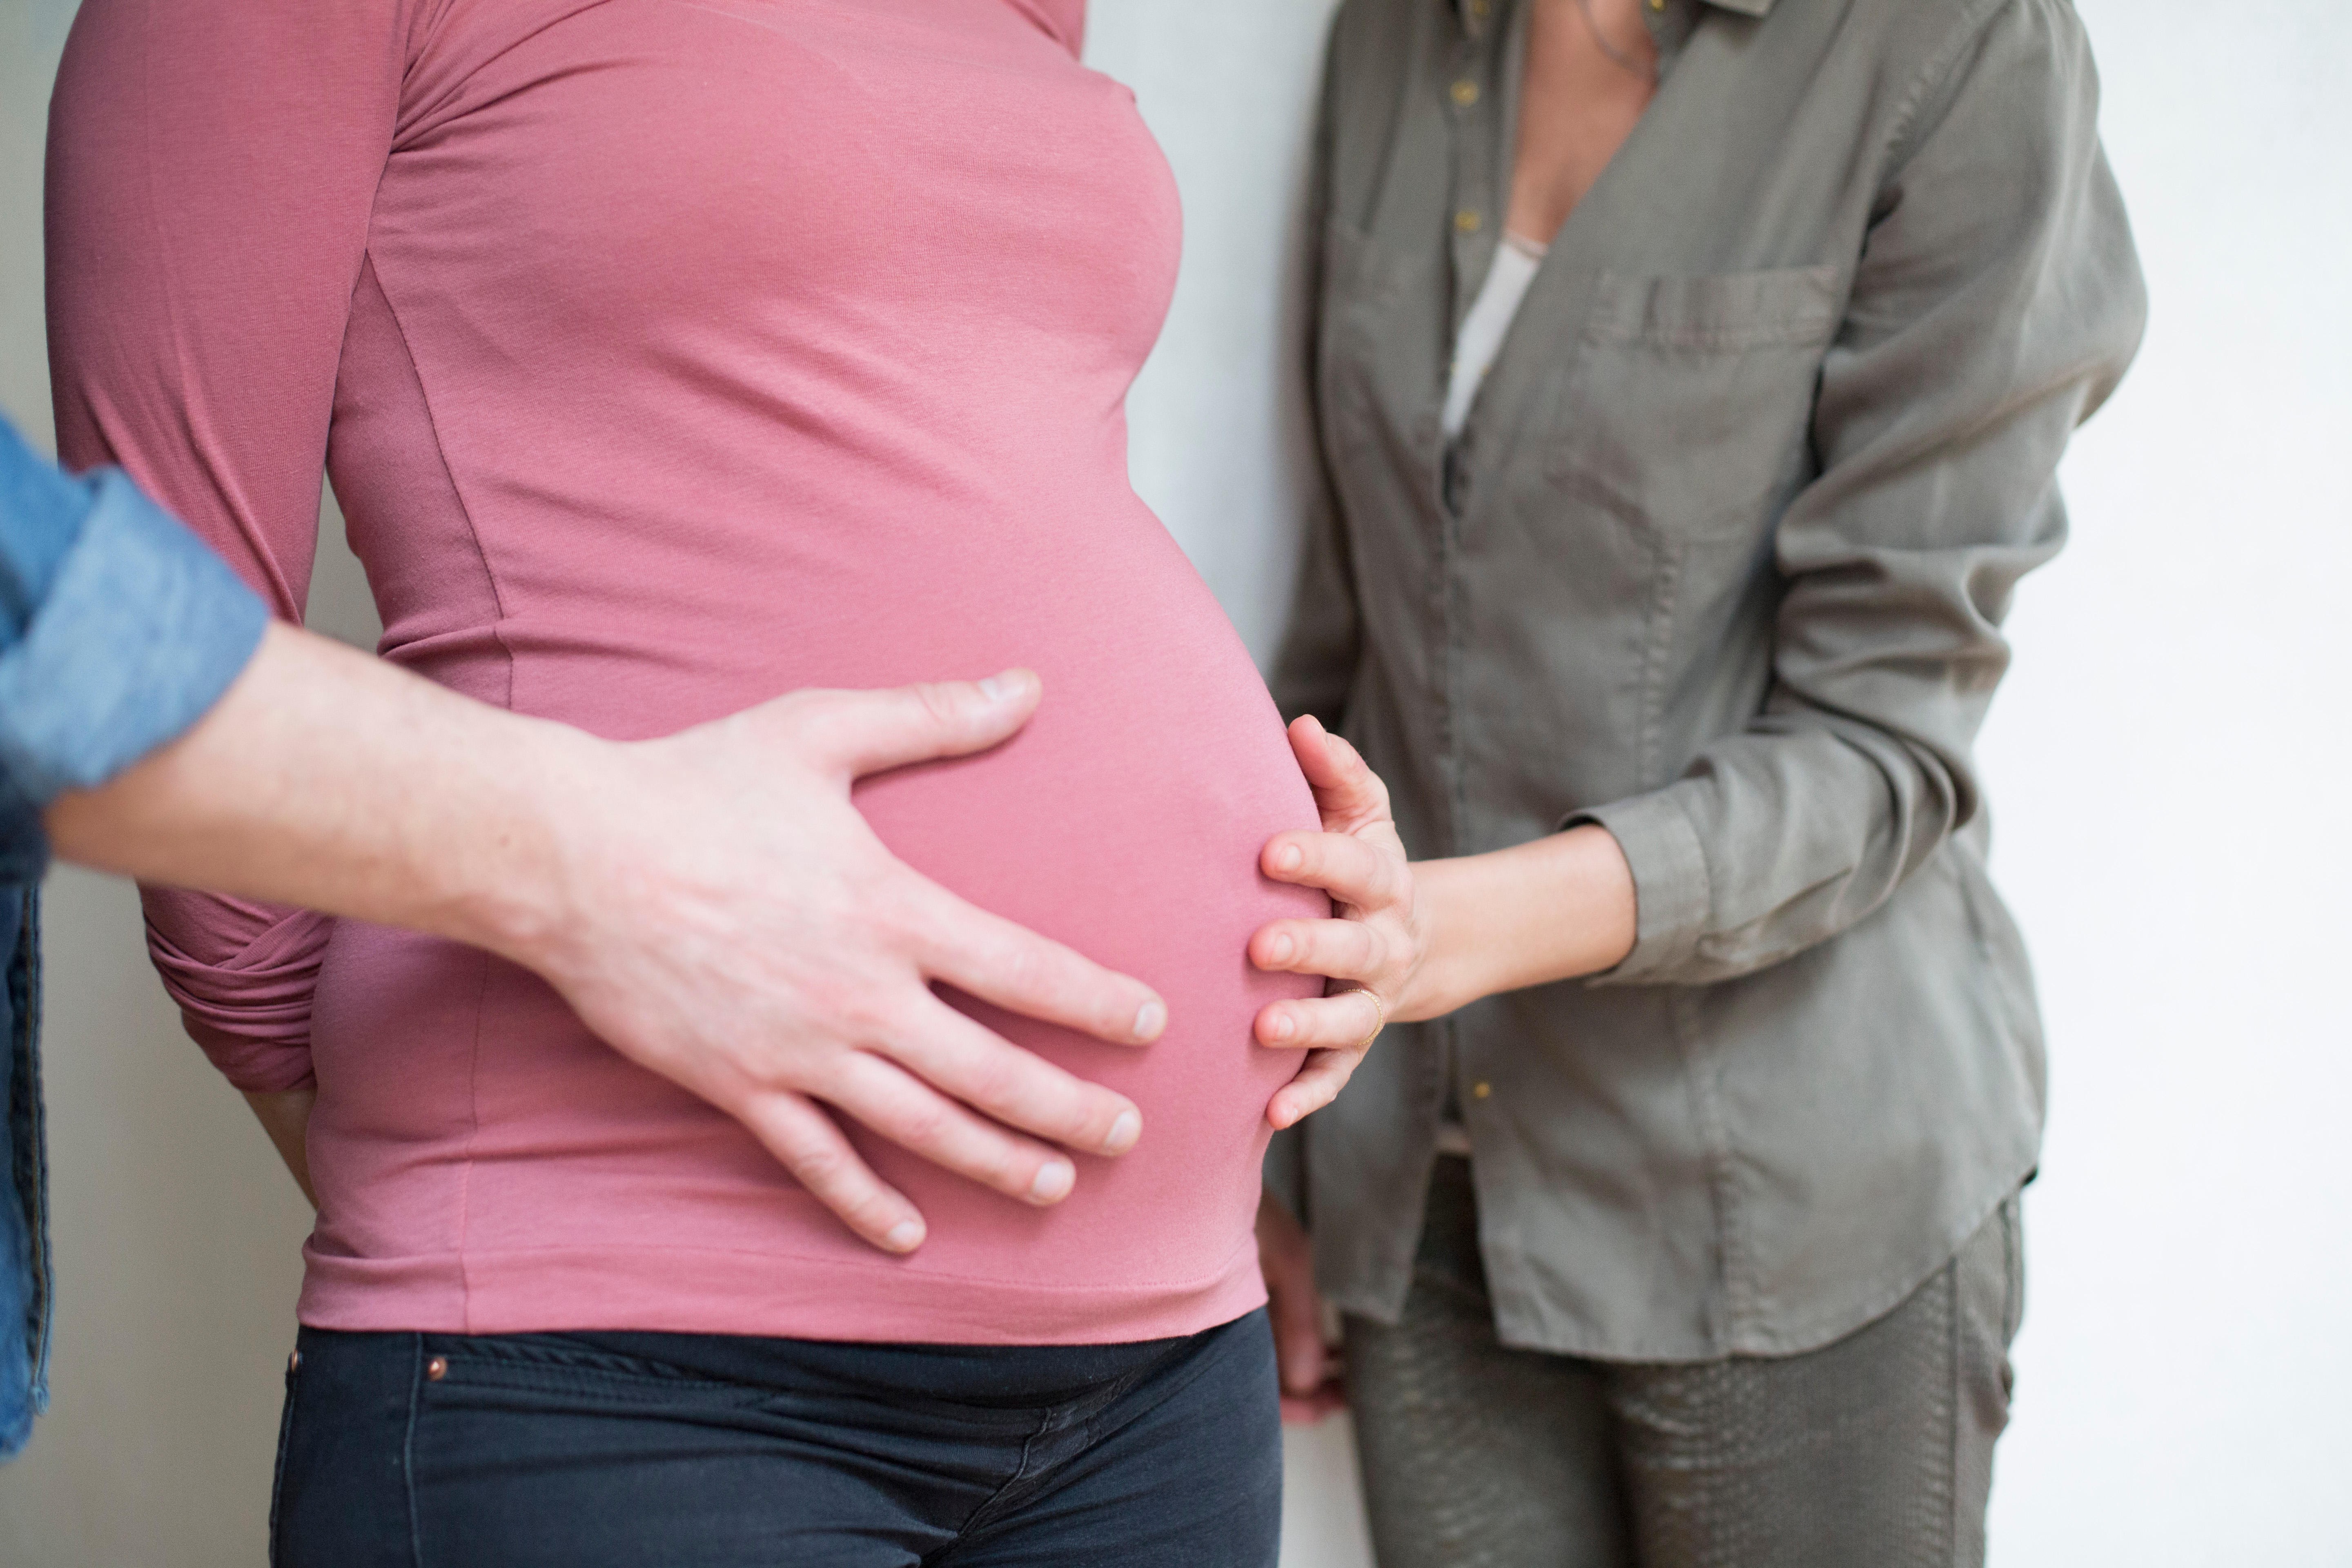 In Hong Kong, surrogacy agreements are unenforceable and commercial surrogacy is illegal. Photo: Alamy